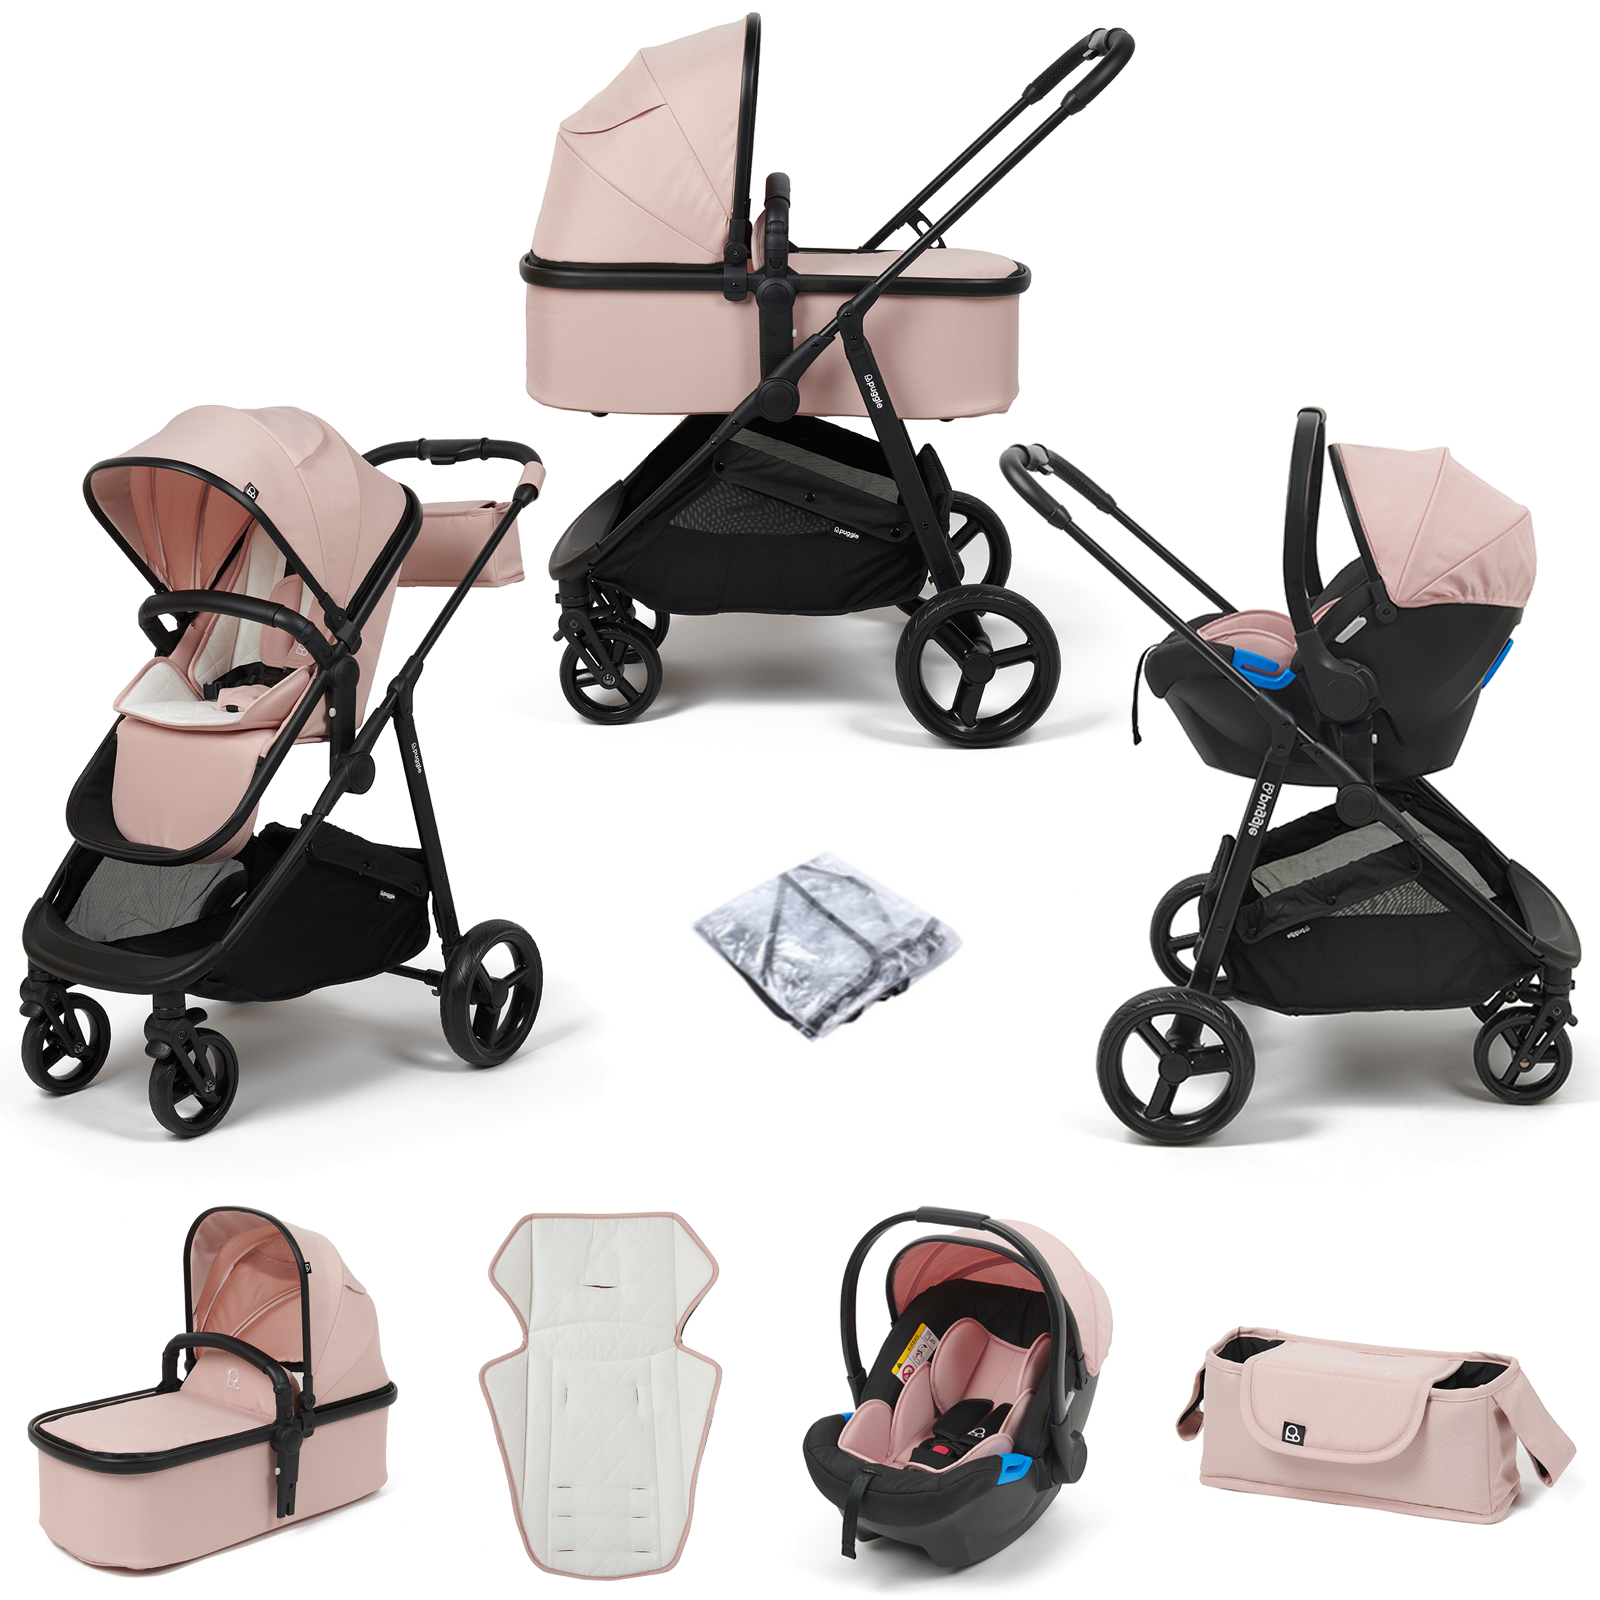 Puggle Monaco XT 3in1 Travel System with Organiser - Blush Pink